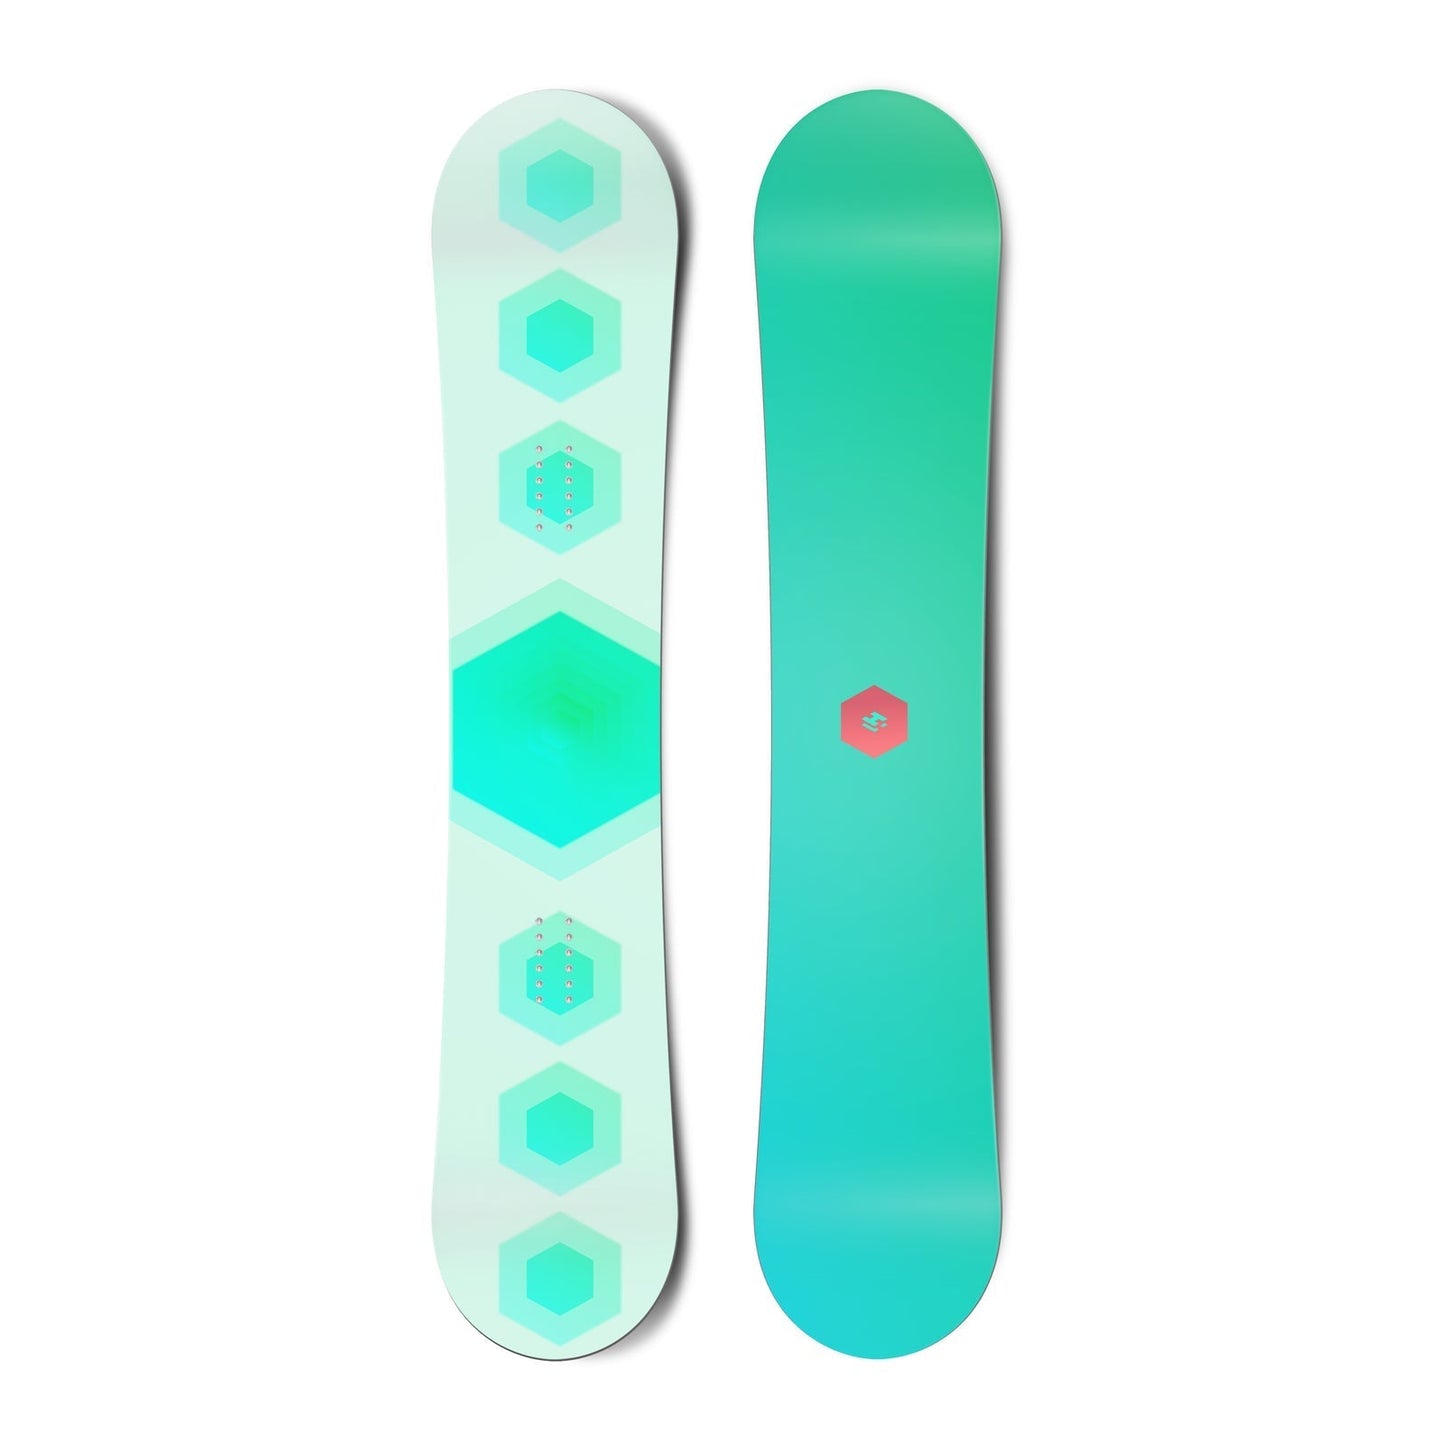 The Third-party fulfilled Snowboard